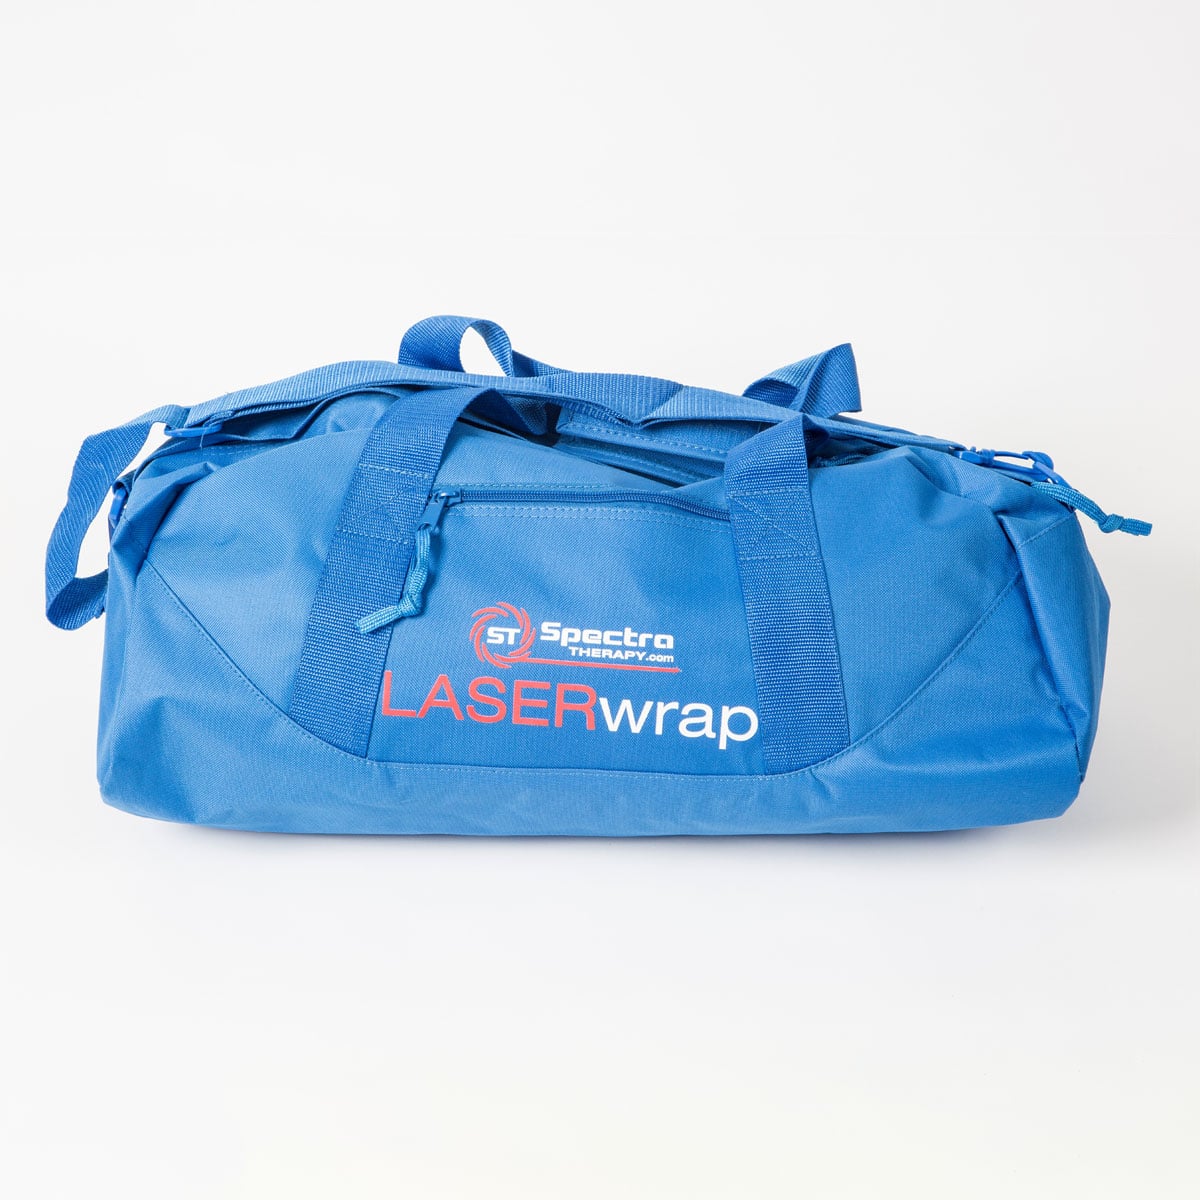 spectra laser therapy duffle bag large